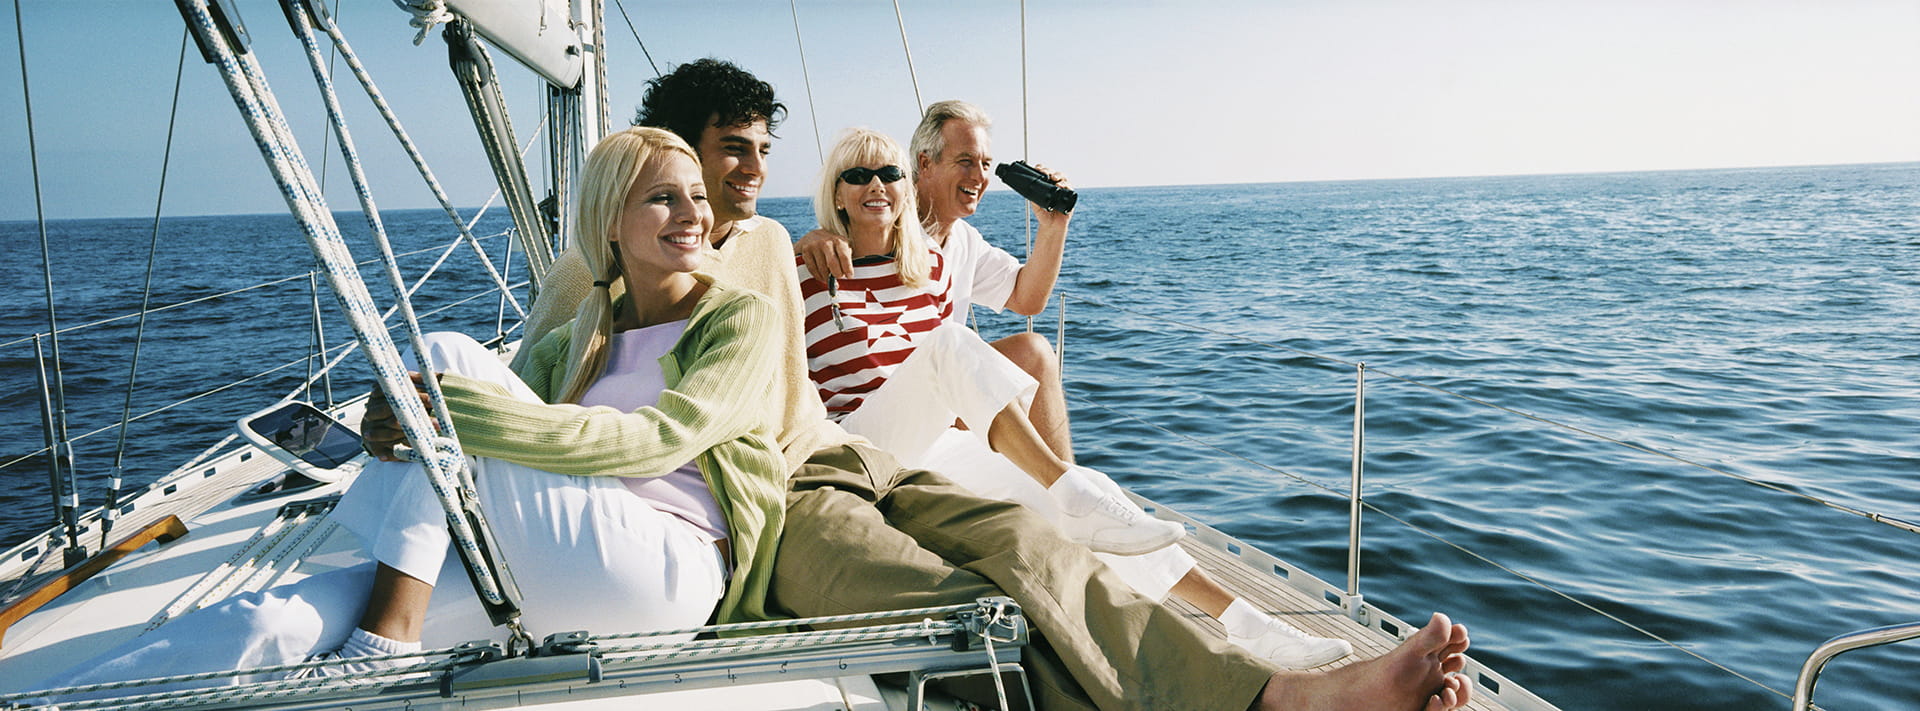 Family sitting on boat deck